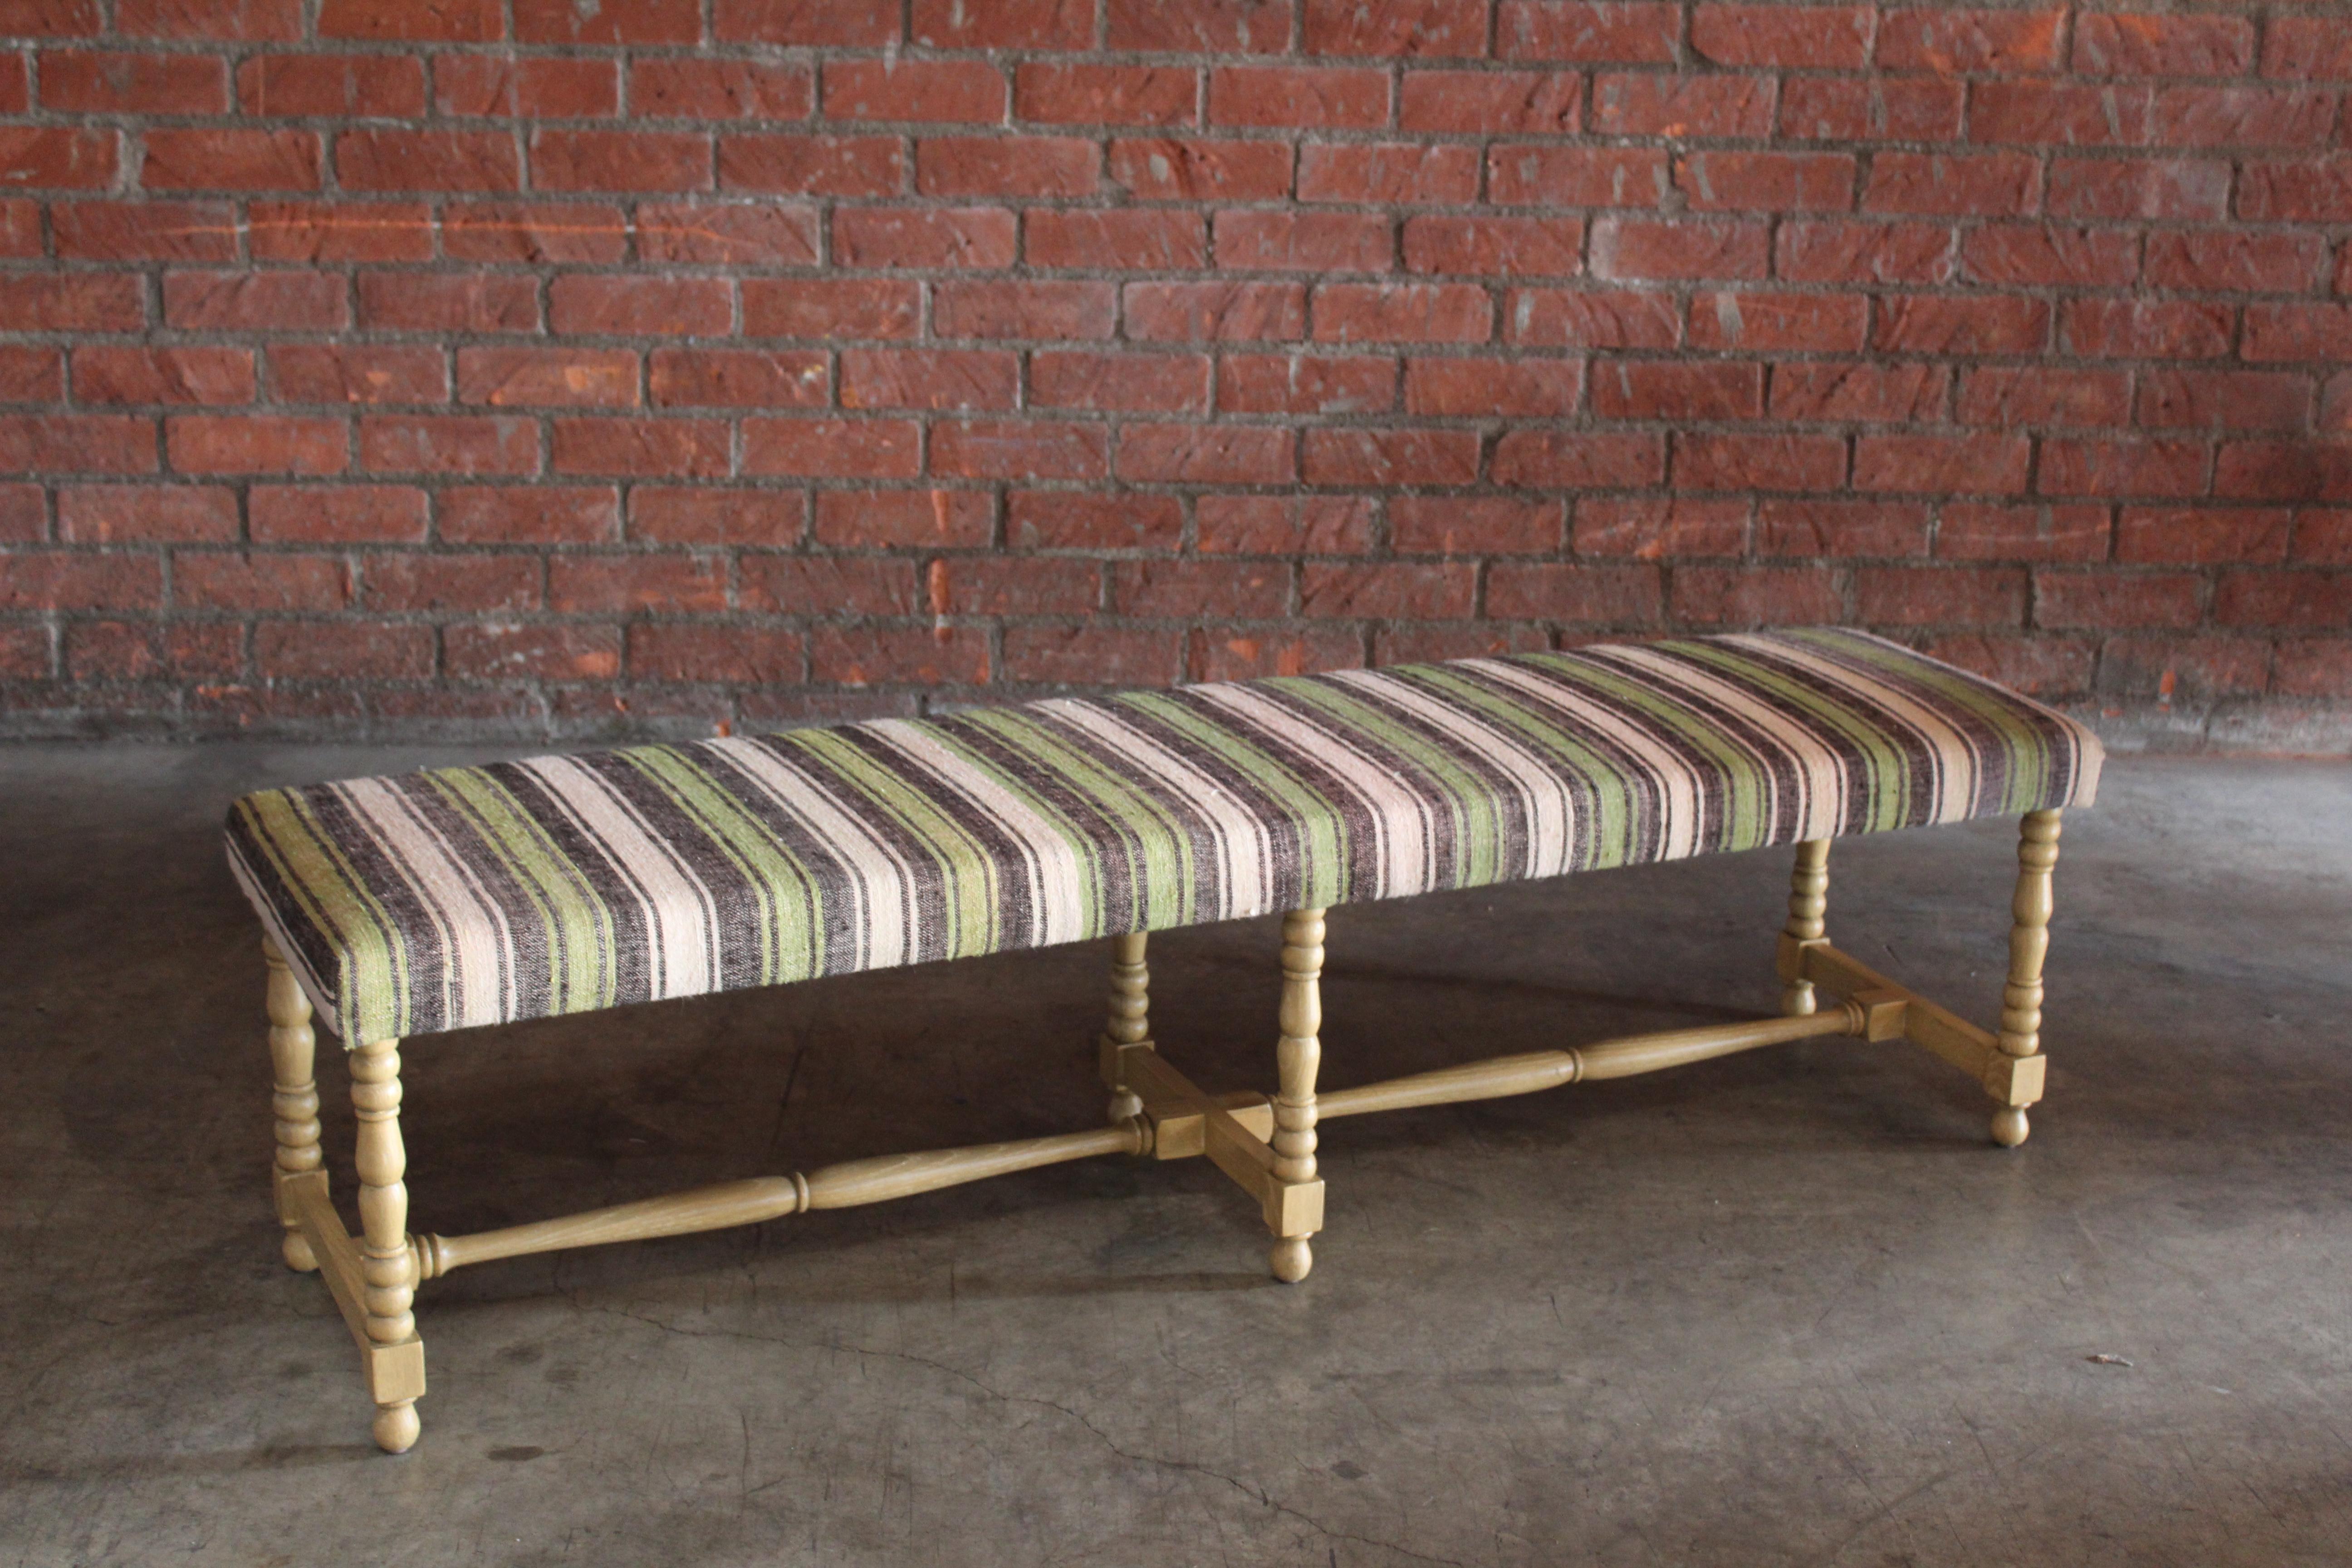 A custom handmade bench made in Los Angeles, based off an antique bench. Constructed in solid oak with a natual light finish. Upholstered in a vintage Turkish striped wool rug. In overall excellent condition.